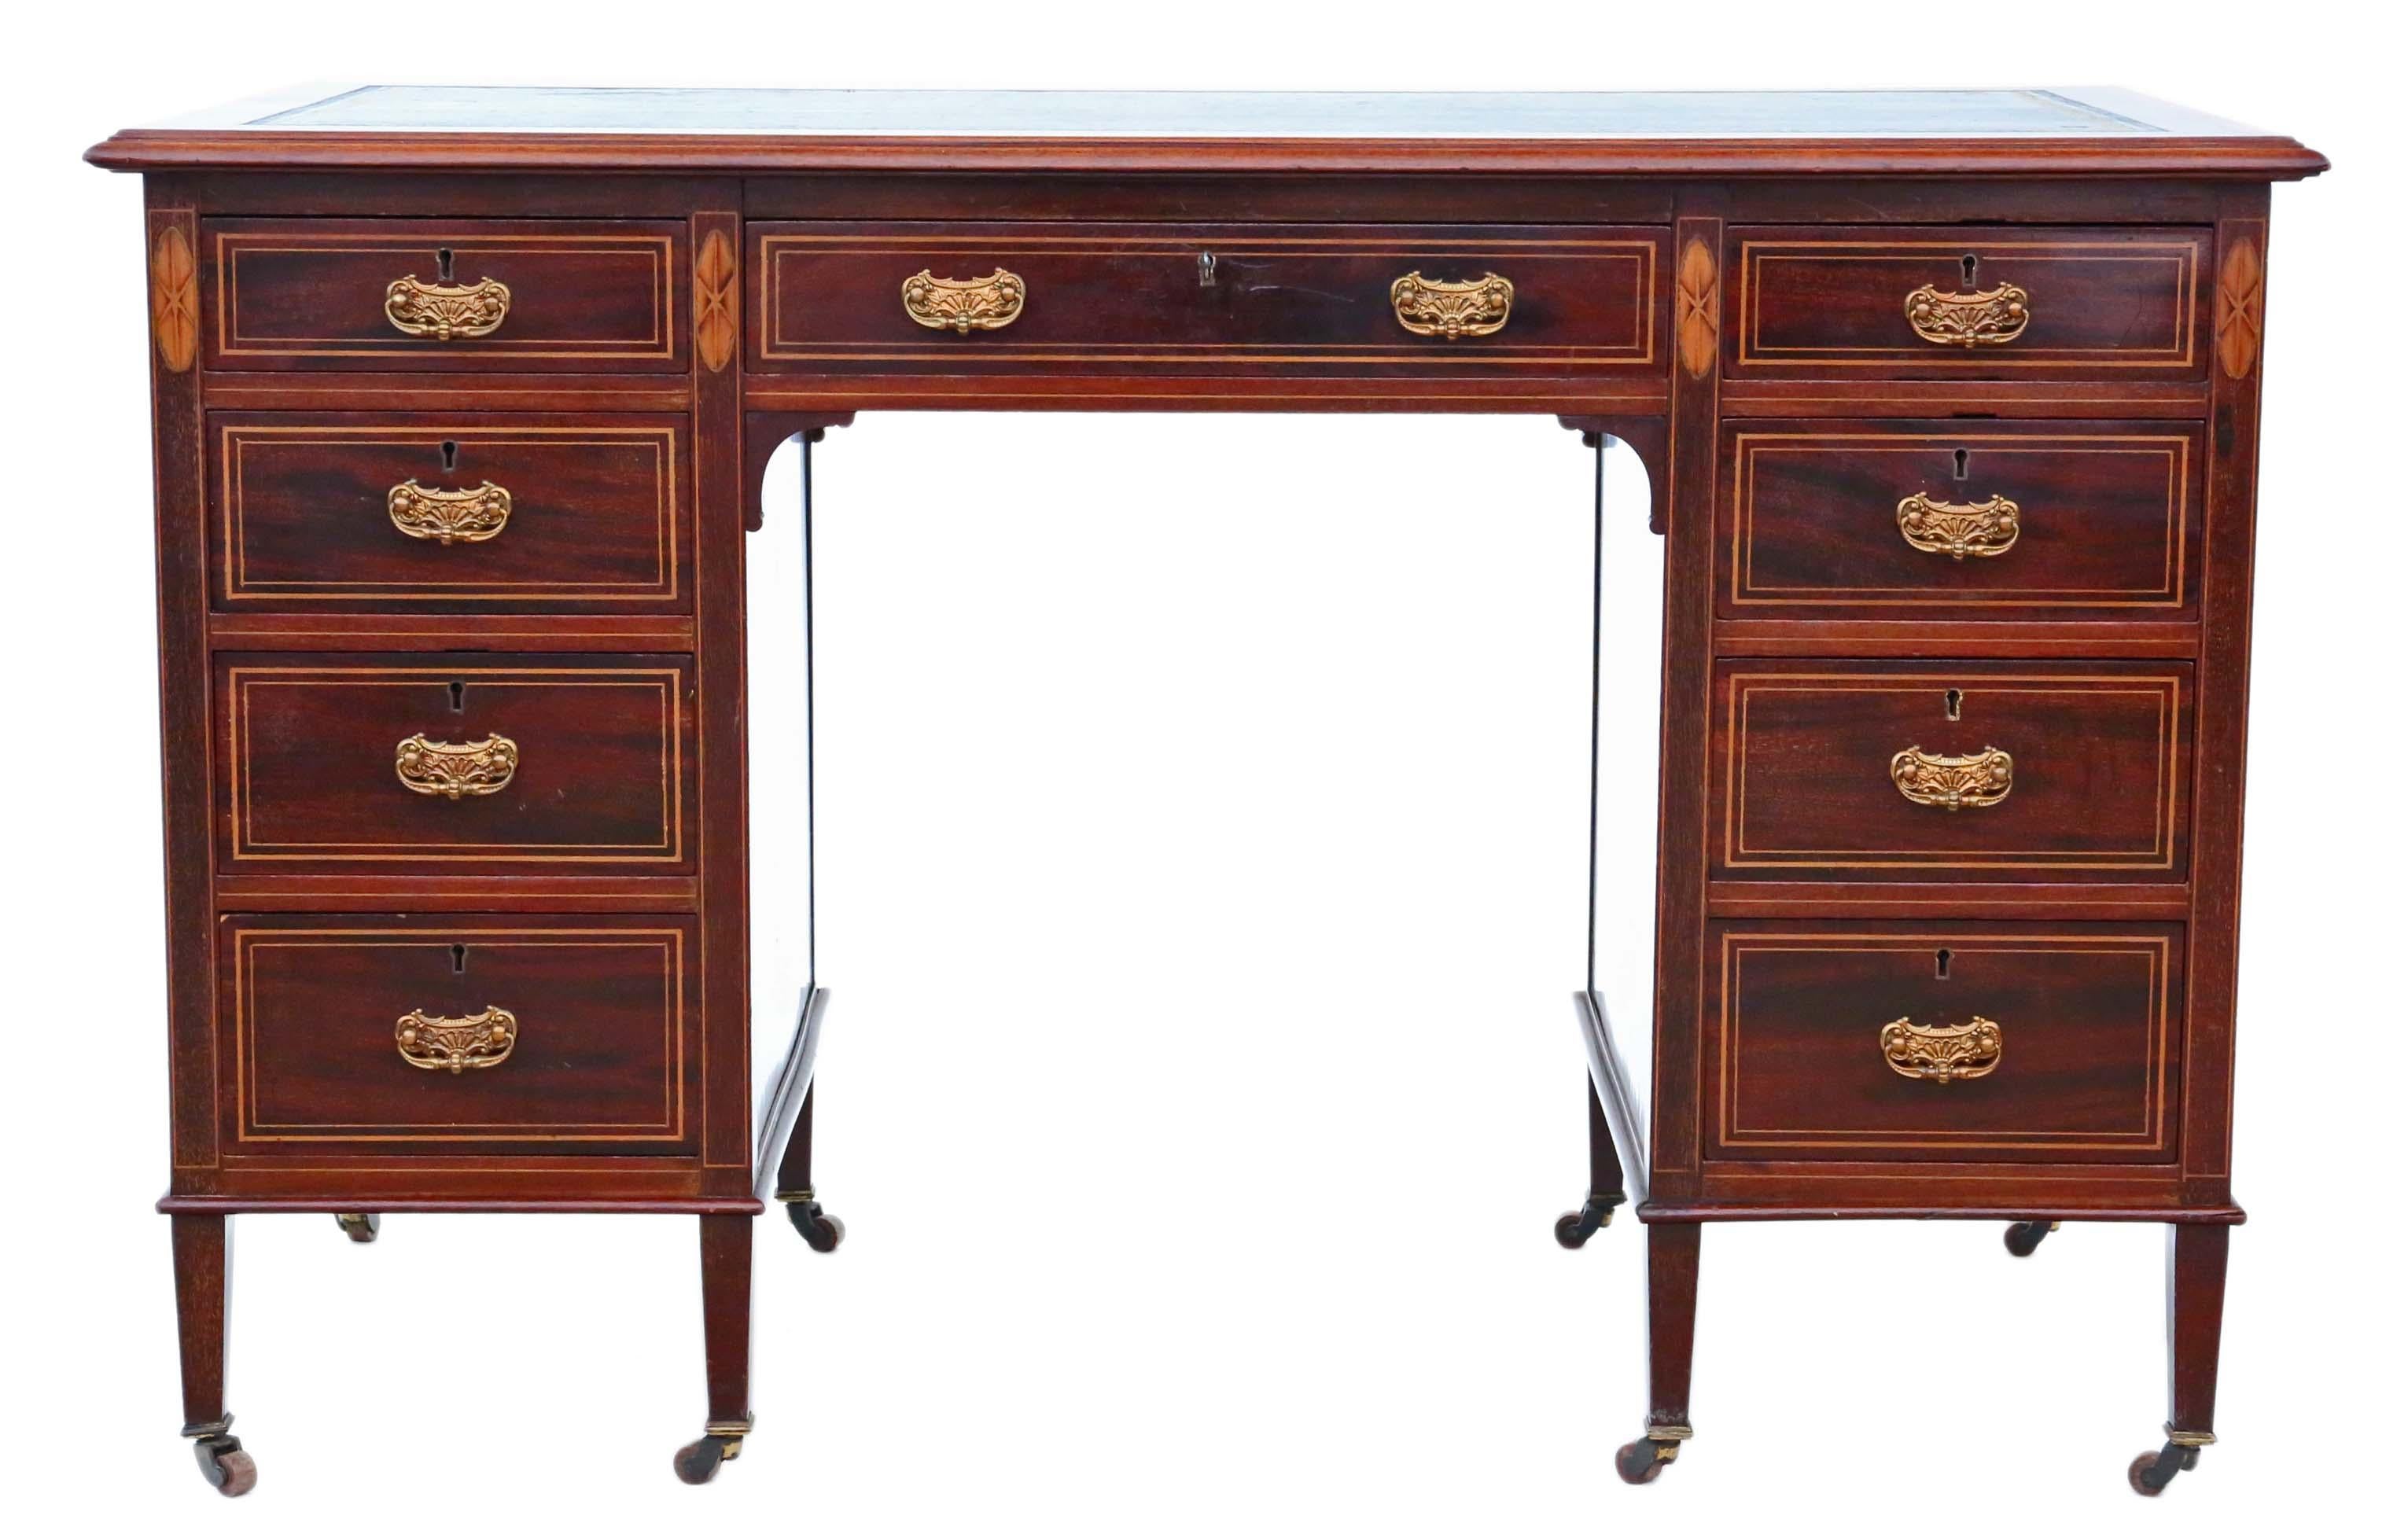 Antique exceptionally fine quality Victorian inlaid mahogany twin pedestal desk by JAS Schoolbred (famous London Maker), circa 1880.
This is a lovely quality piece, that is full of age, charm and character. Patinated tooled leather top.
Solid with